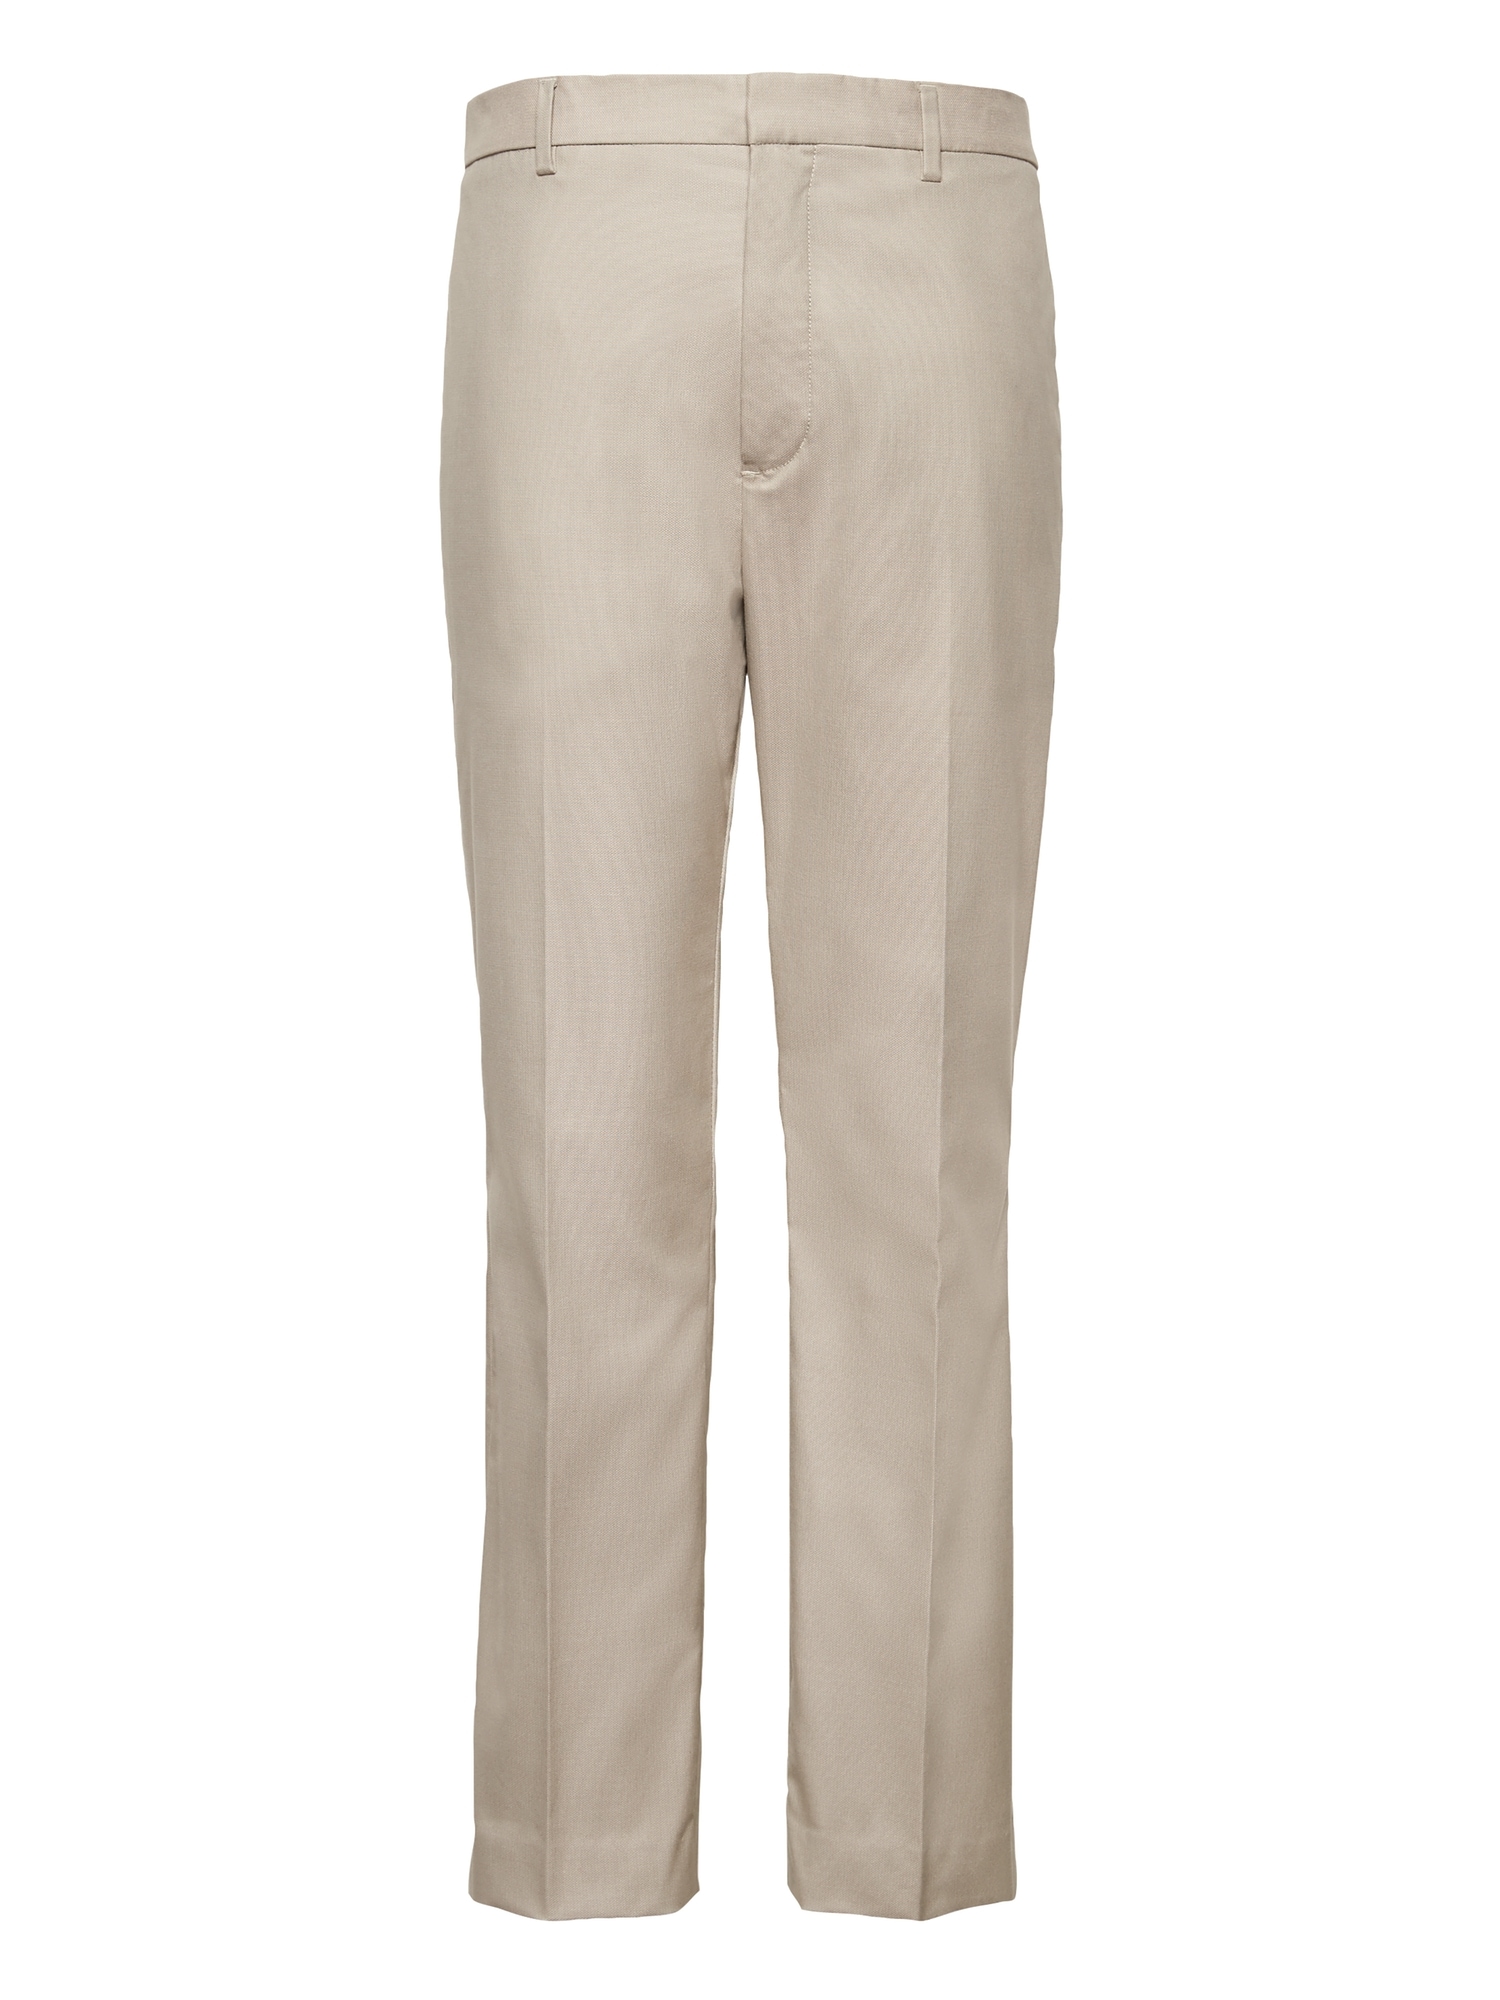 Athletic Tapered Non-Iron Stretch Dress Pant | Banana Republic